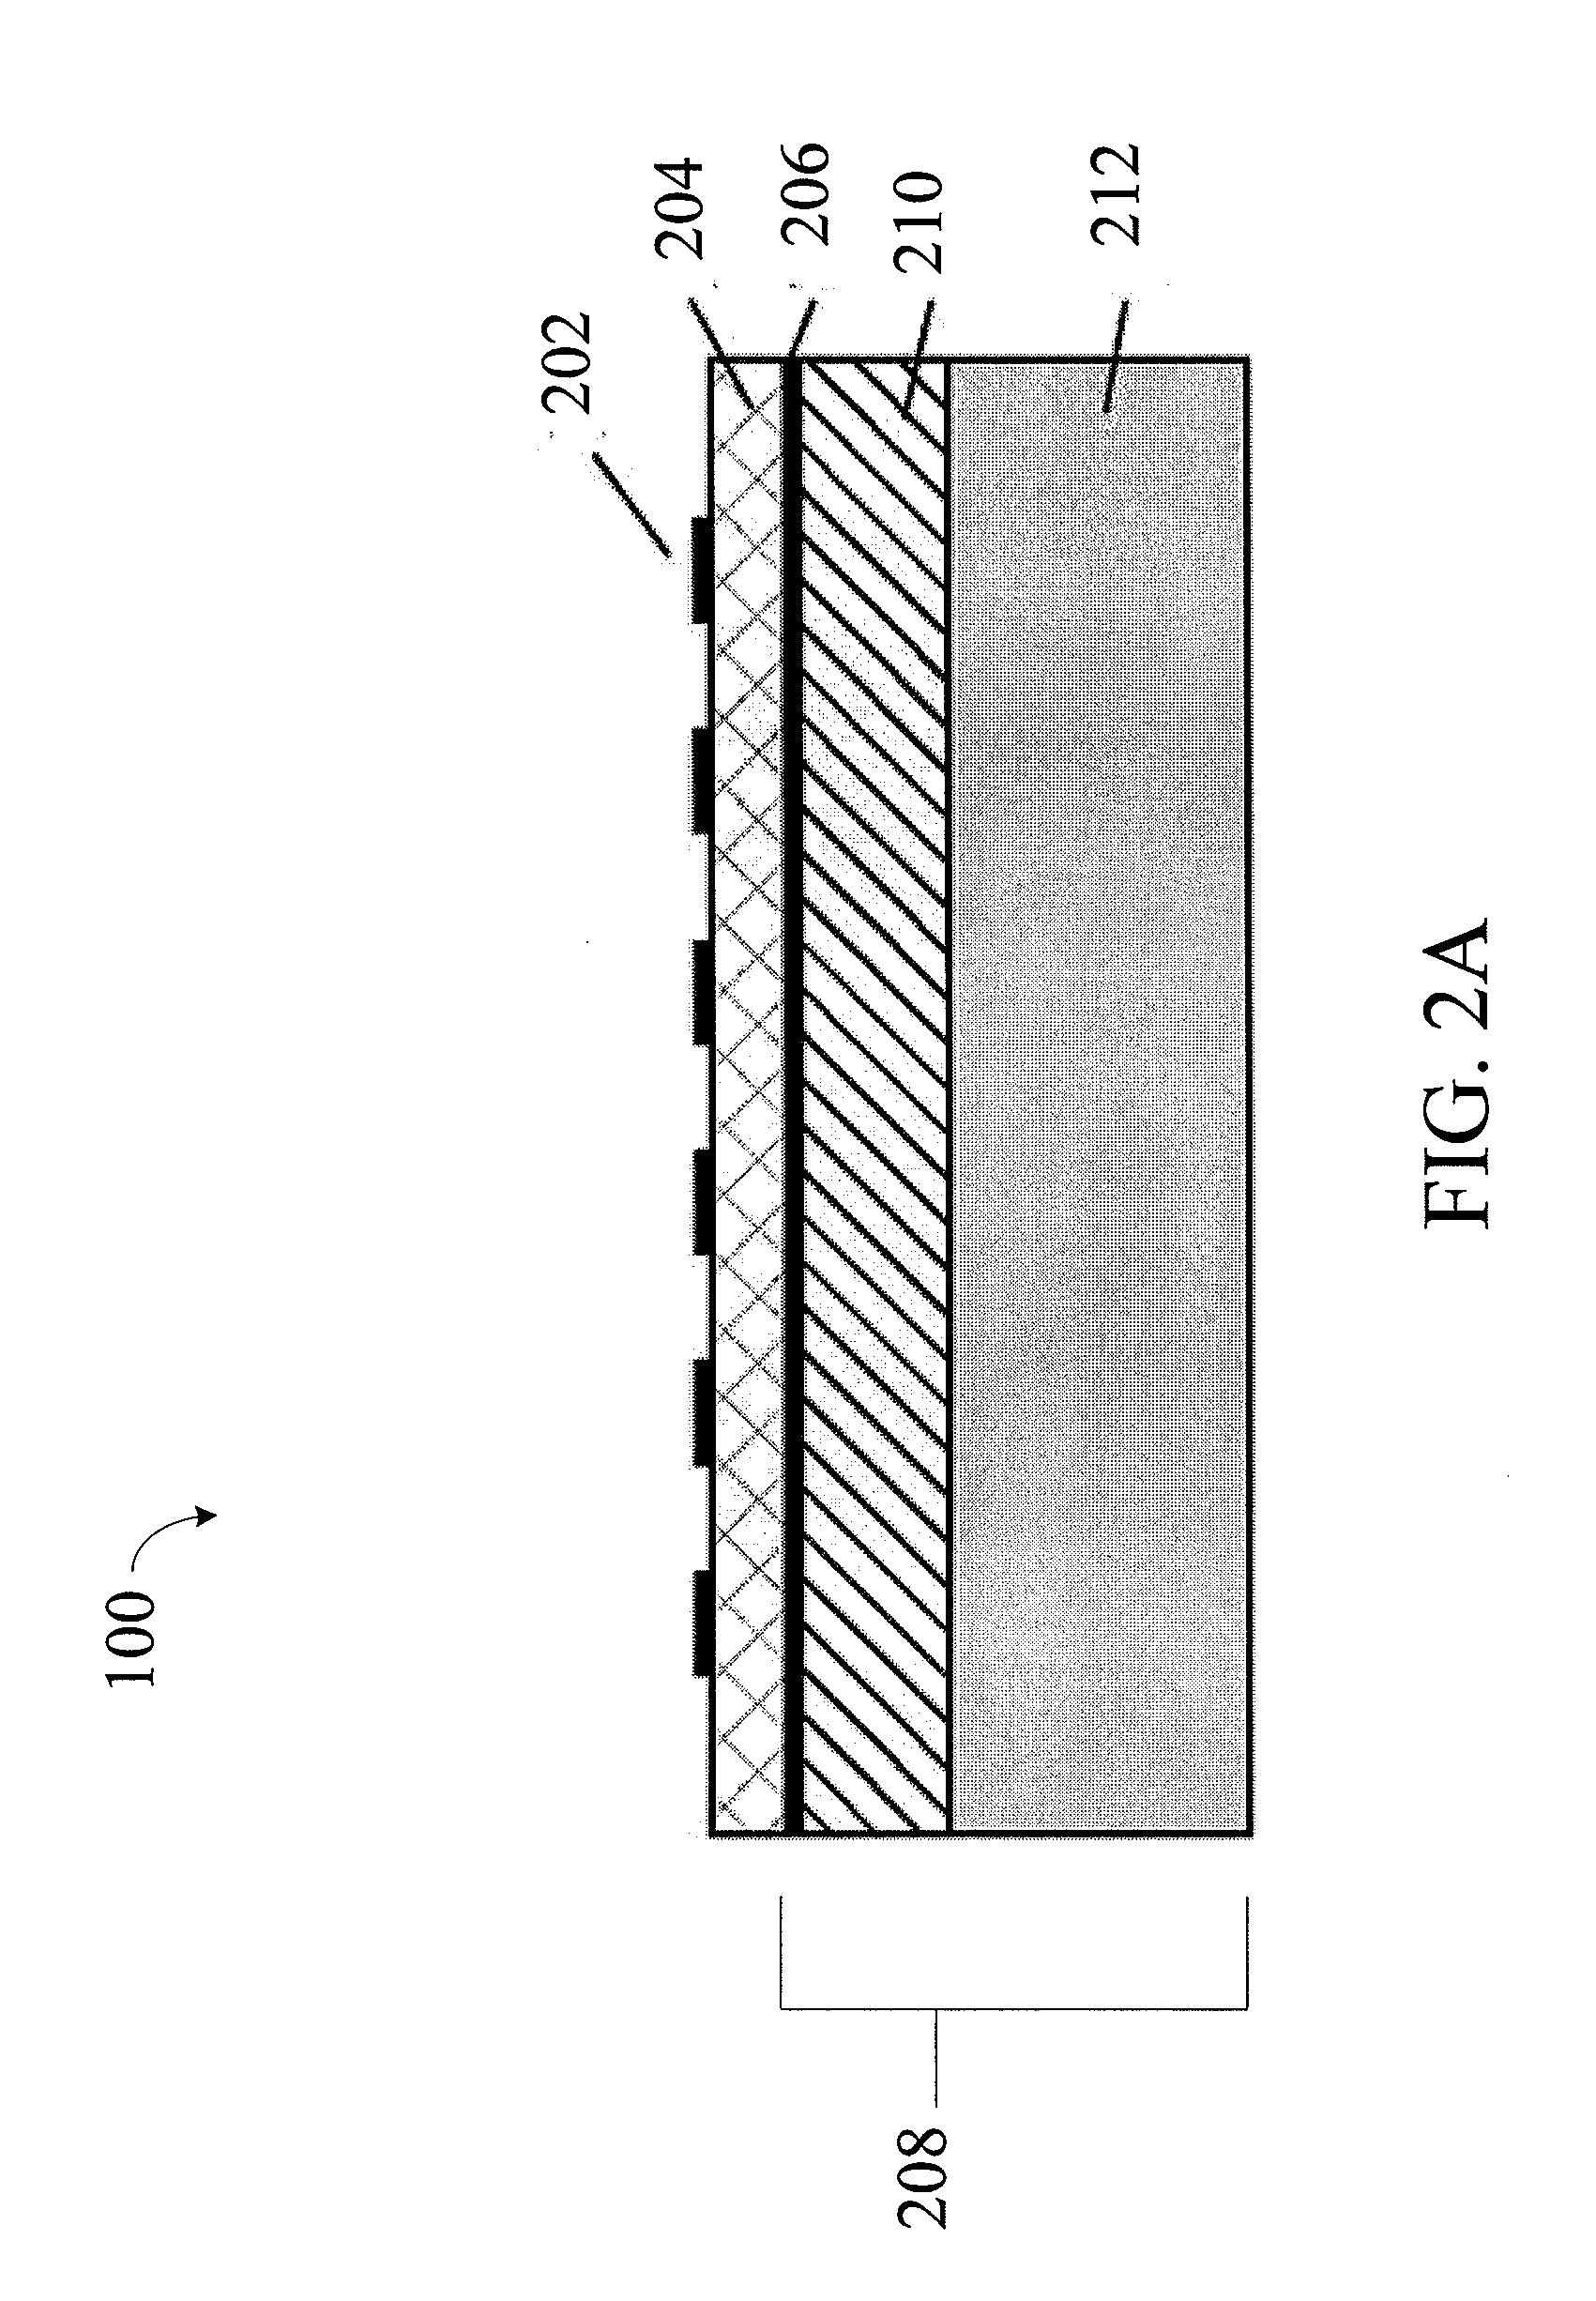 Mechanical resonating structures including a temperature compensation structure